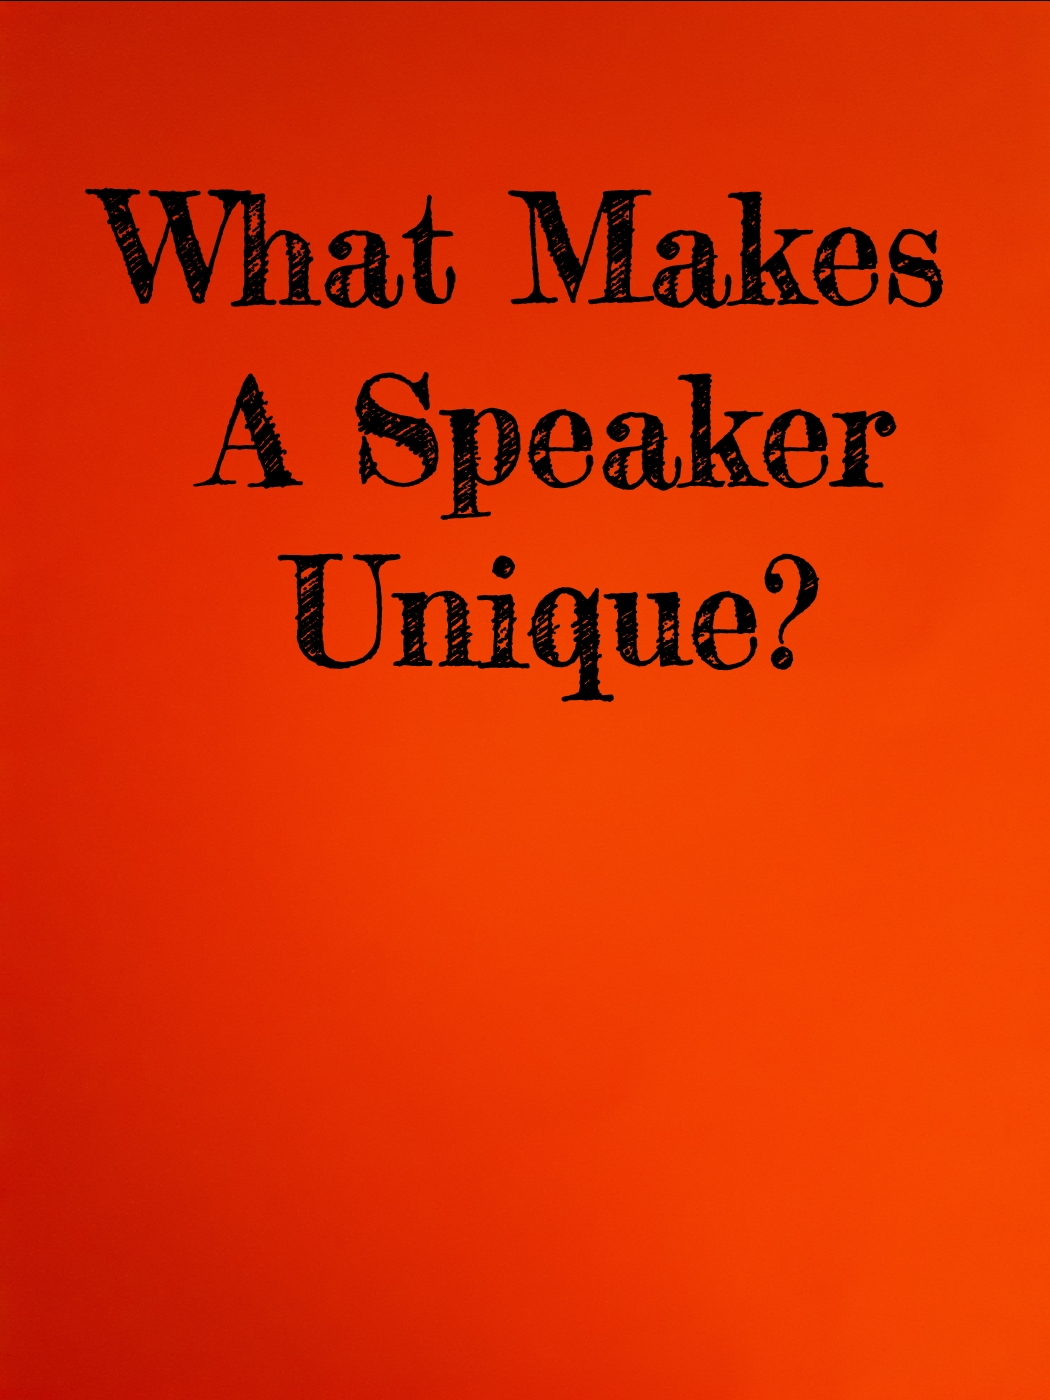 Anders Wanorde Volg ons WHAT MAKES A SPEAKER UNIQUE?